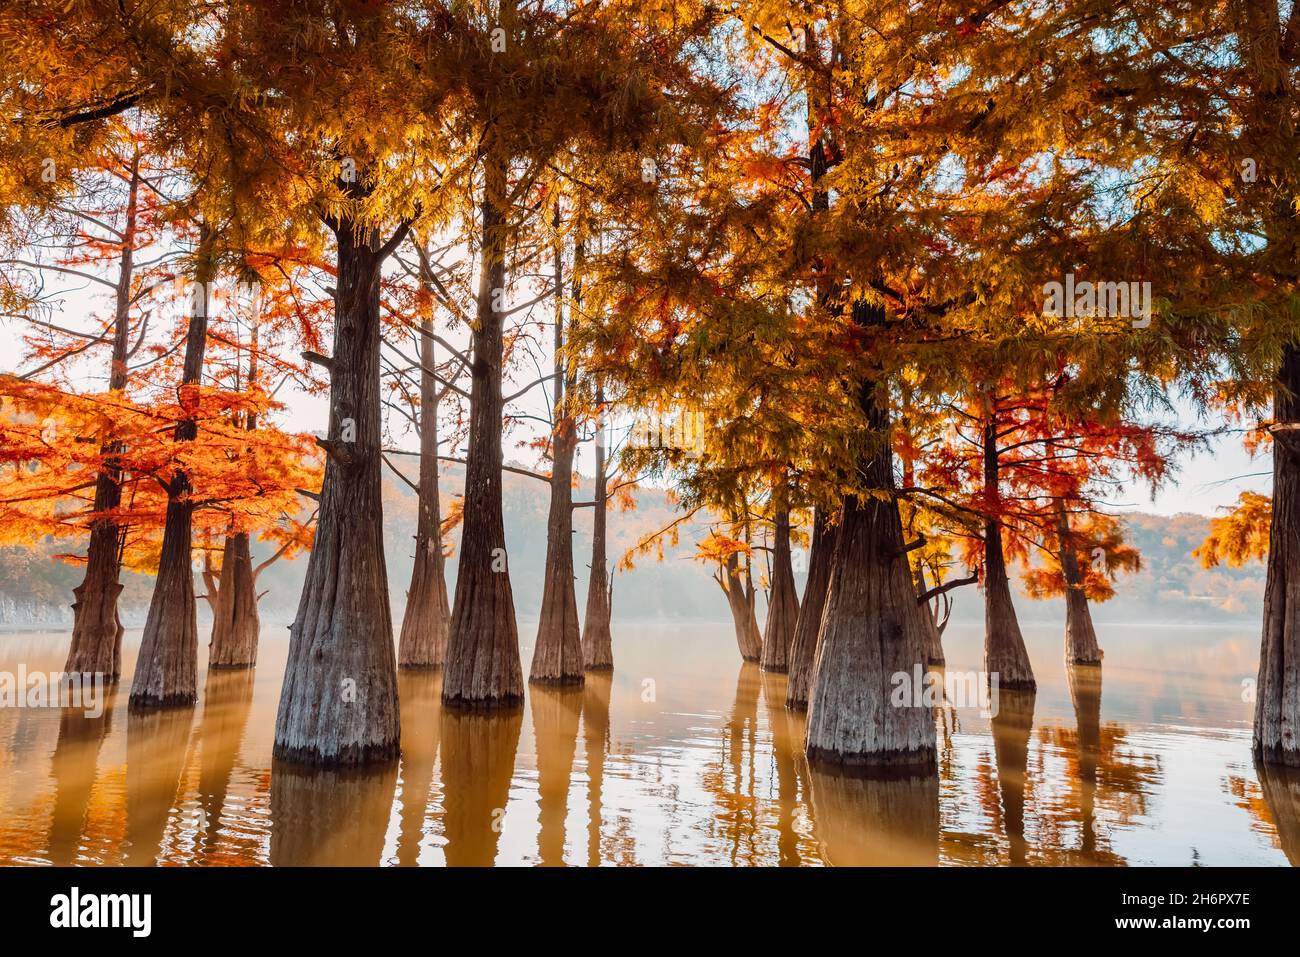 Autumn on lake with swamp cypresses with reflection. Stock Photo